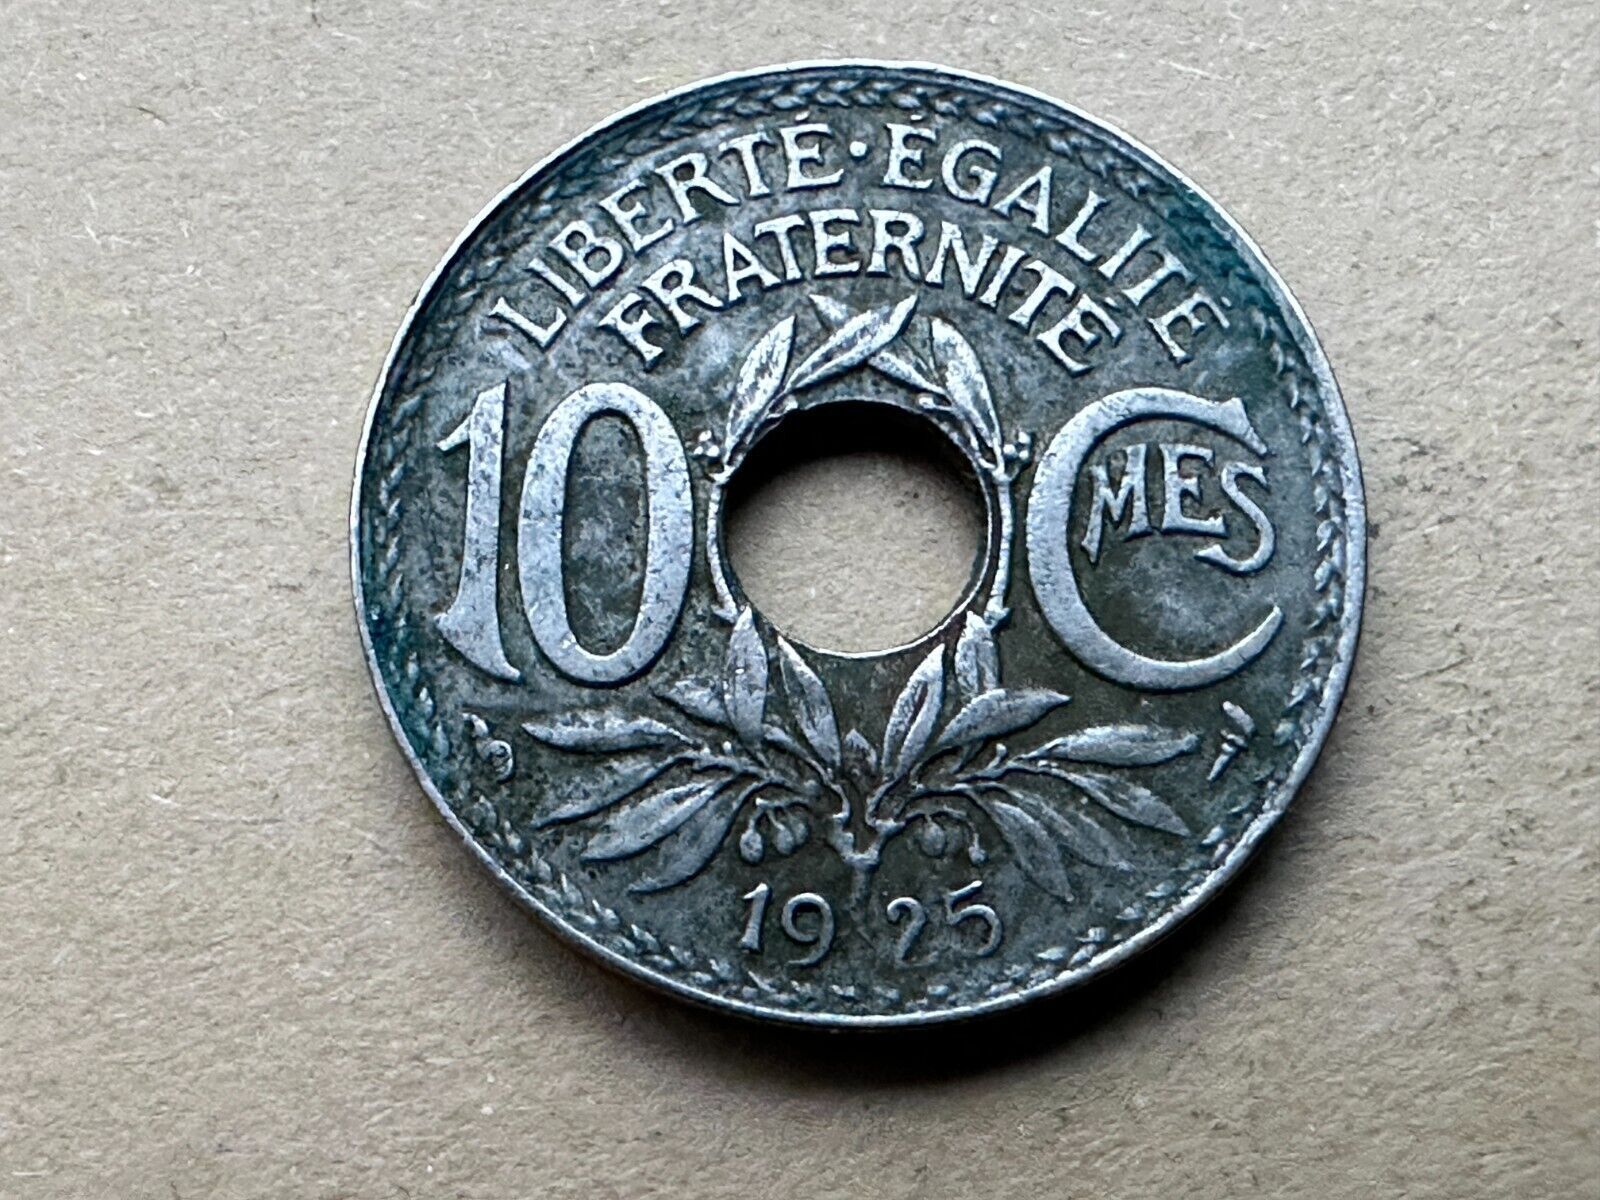 1925 France 10 Centimes Coin    Copper Nickel      #W64